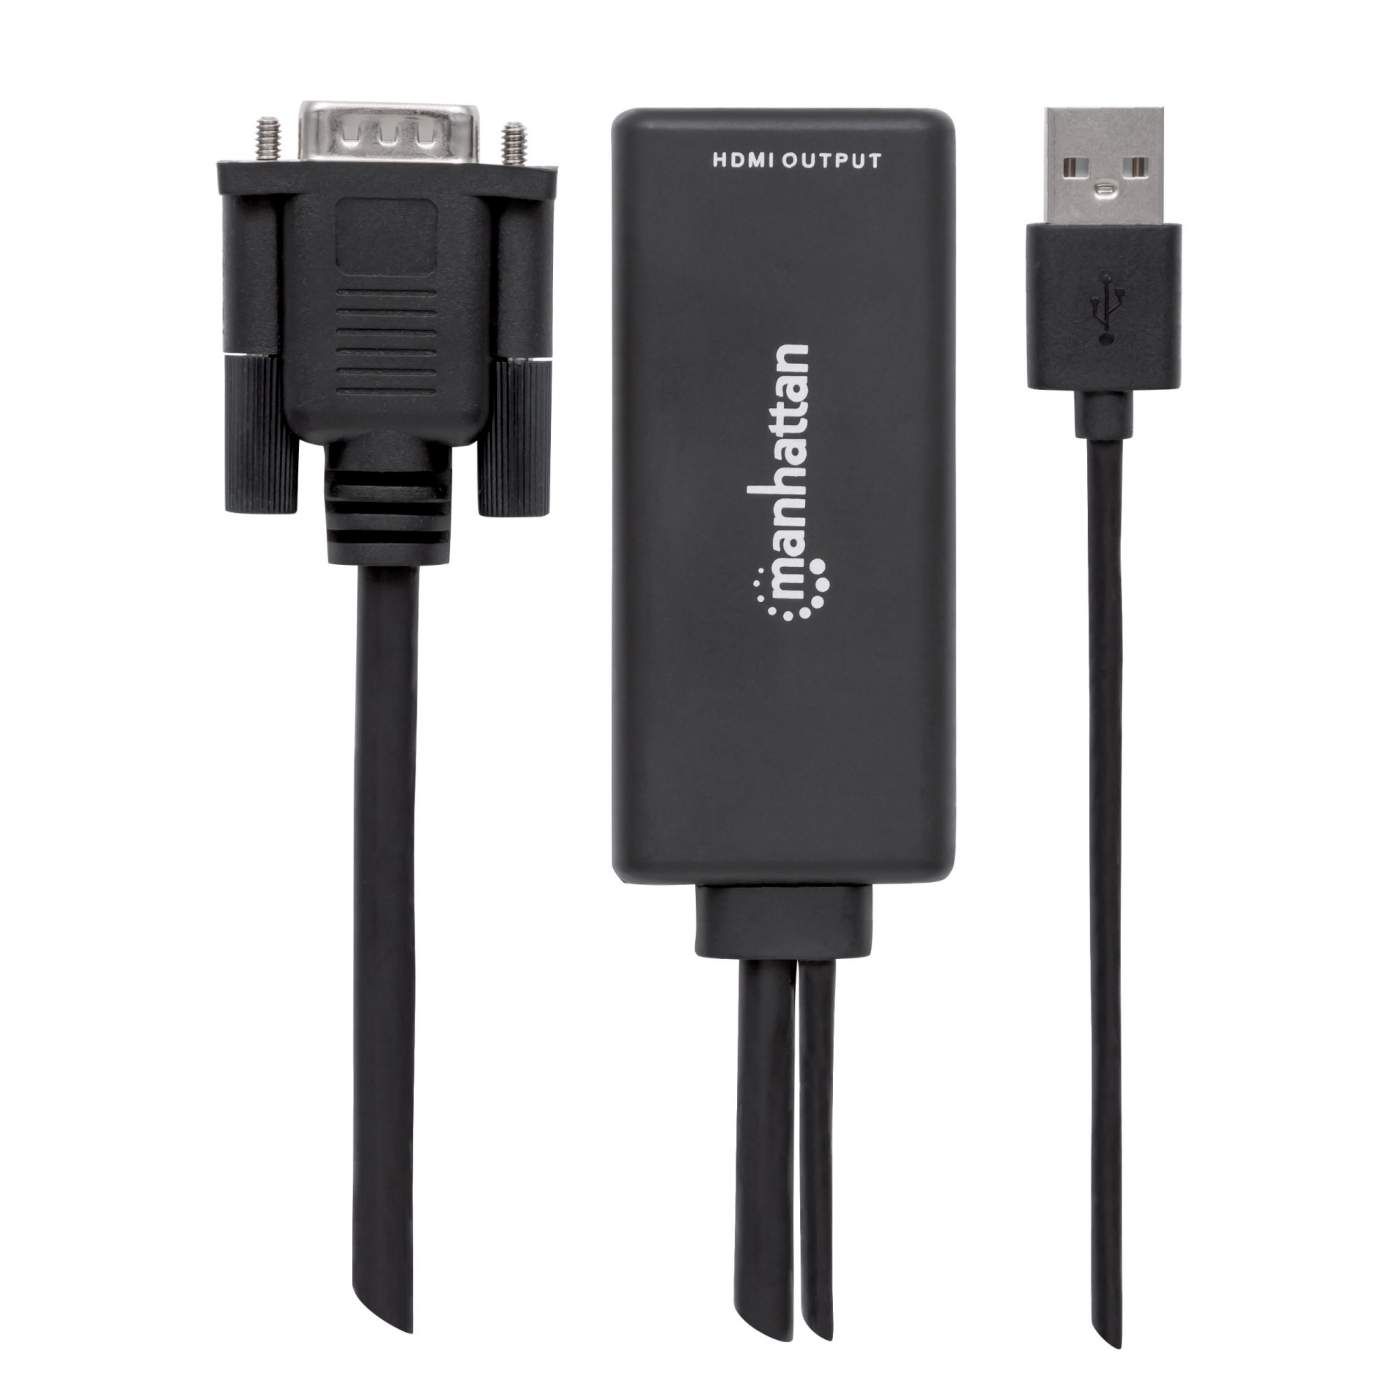 vga to hdmi converter cable products for sale